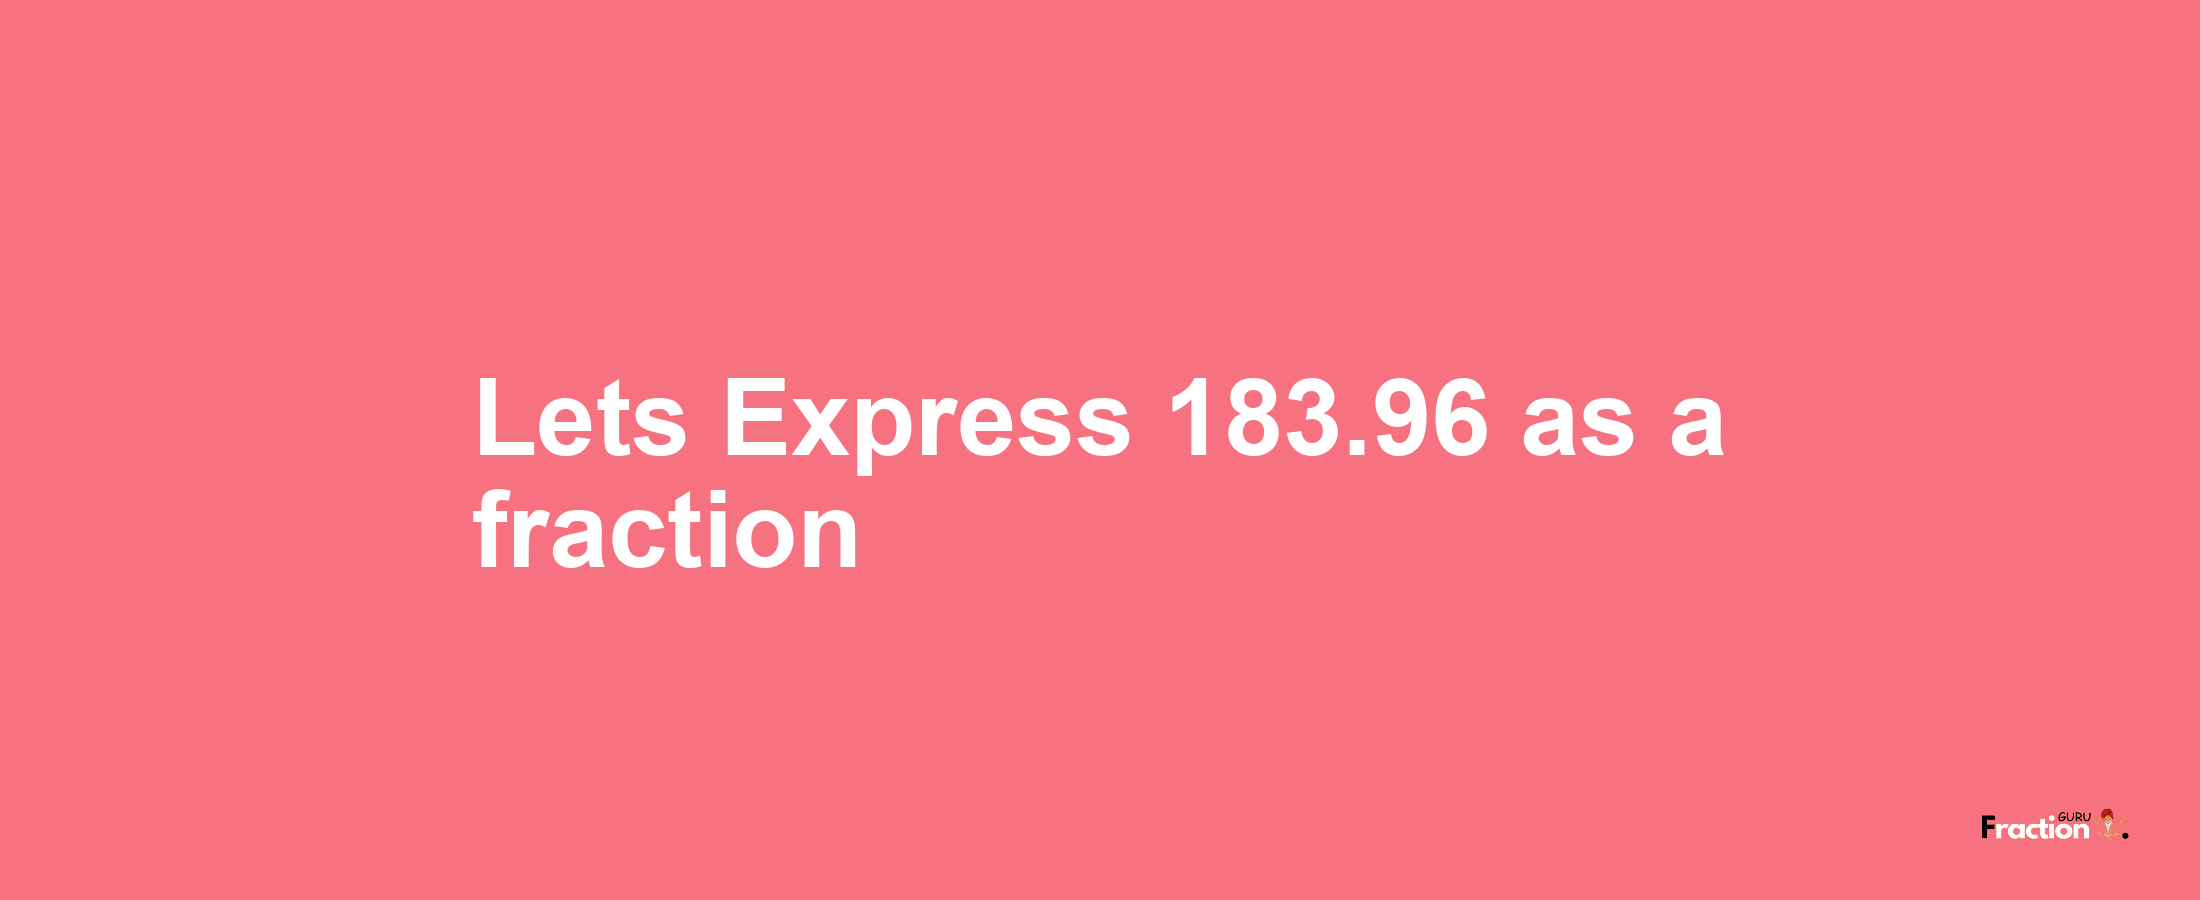 Lets Express 183.96 as afraction